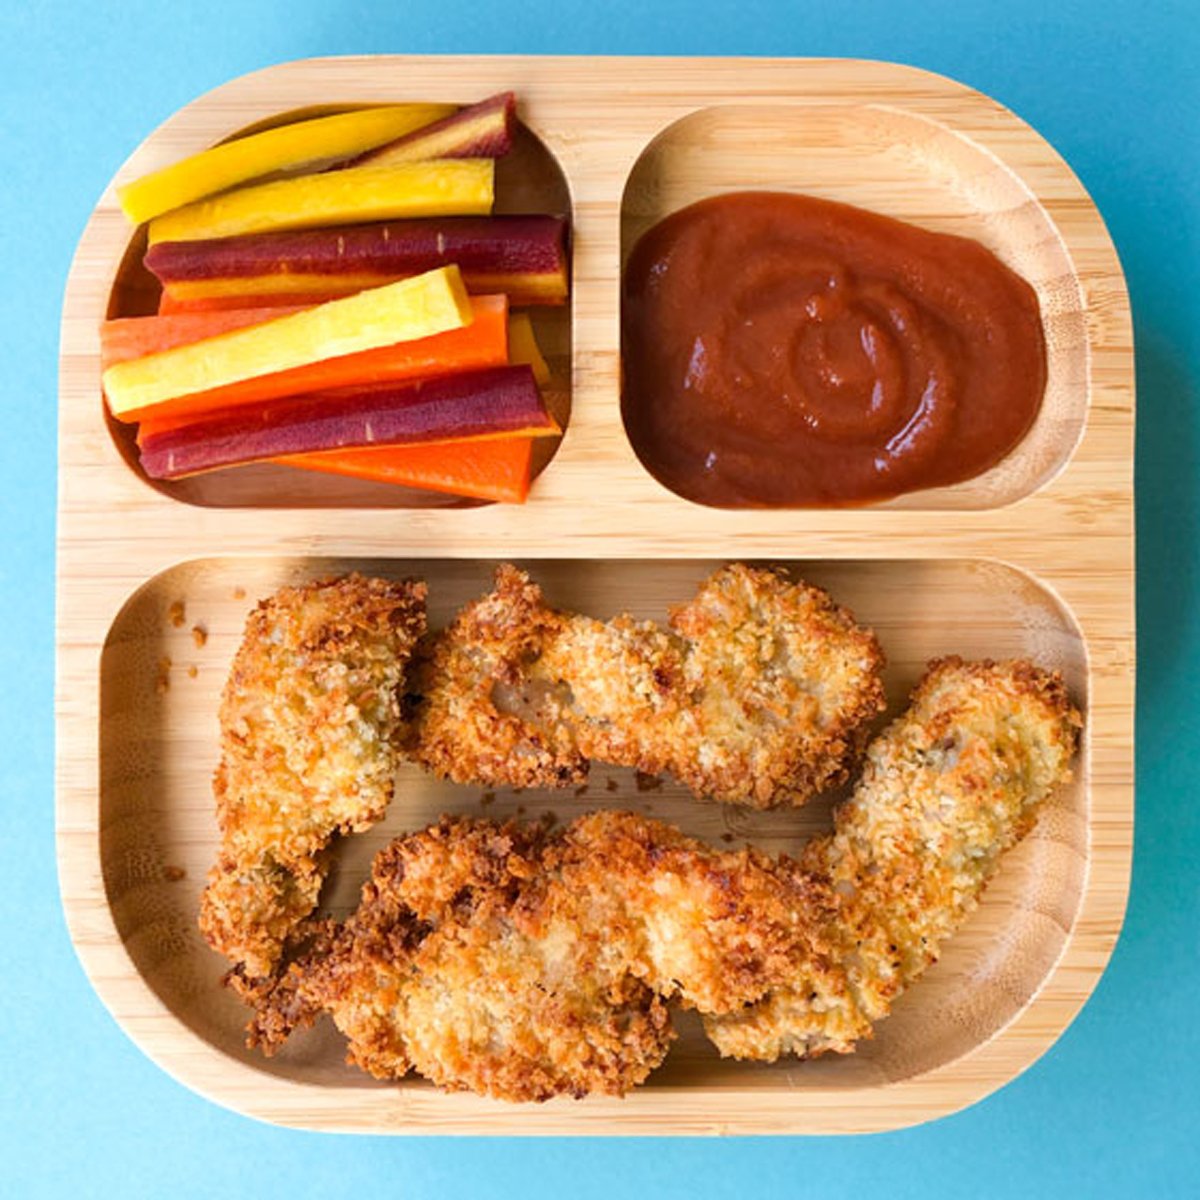 Toddler plate with chicken strips, ketchup and carrot sticks.